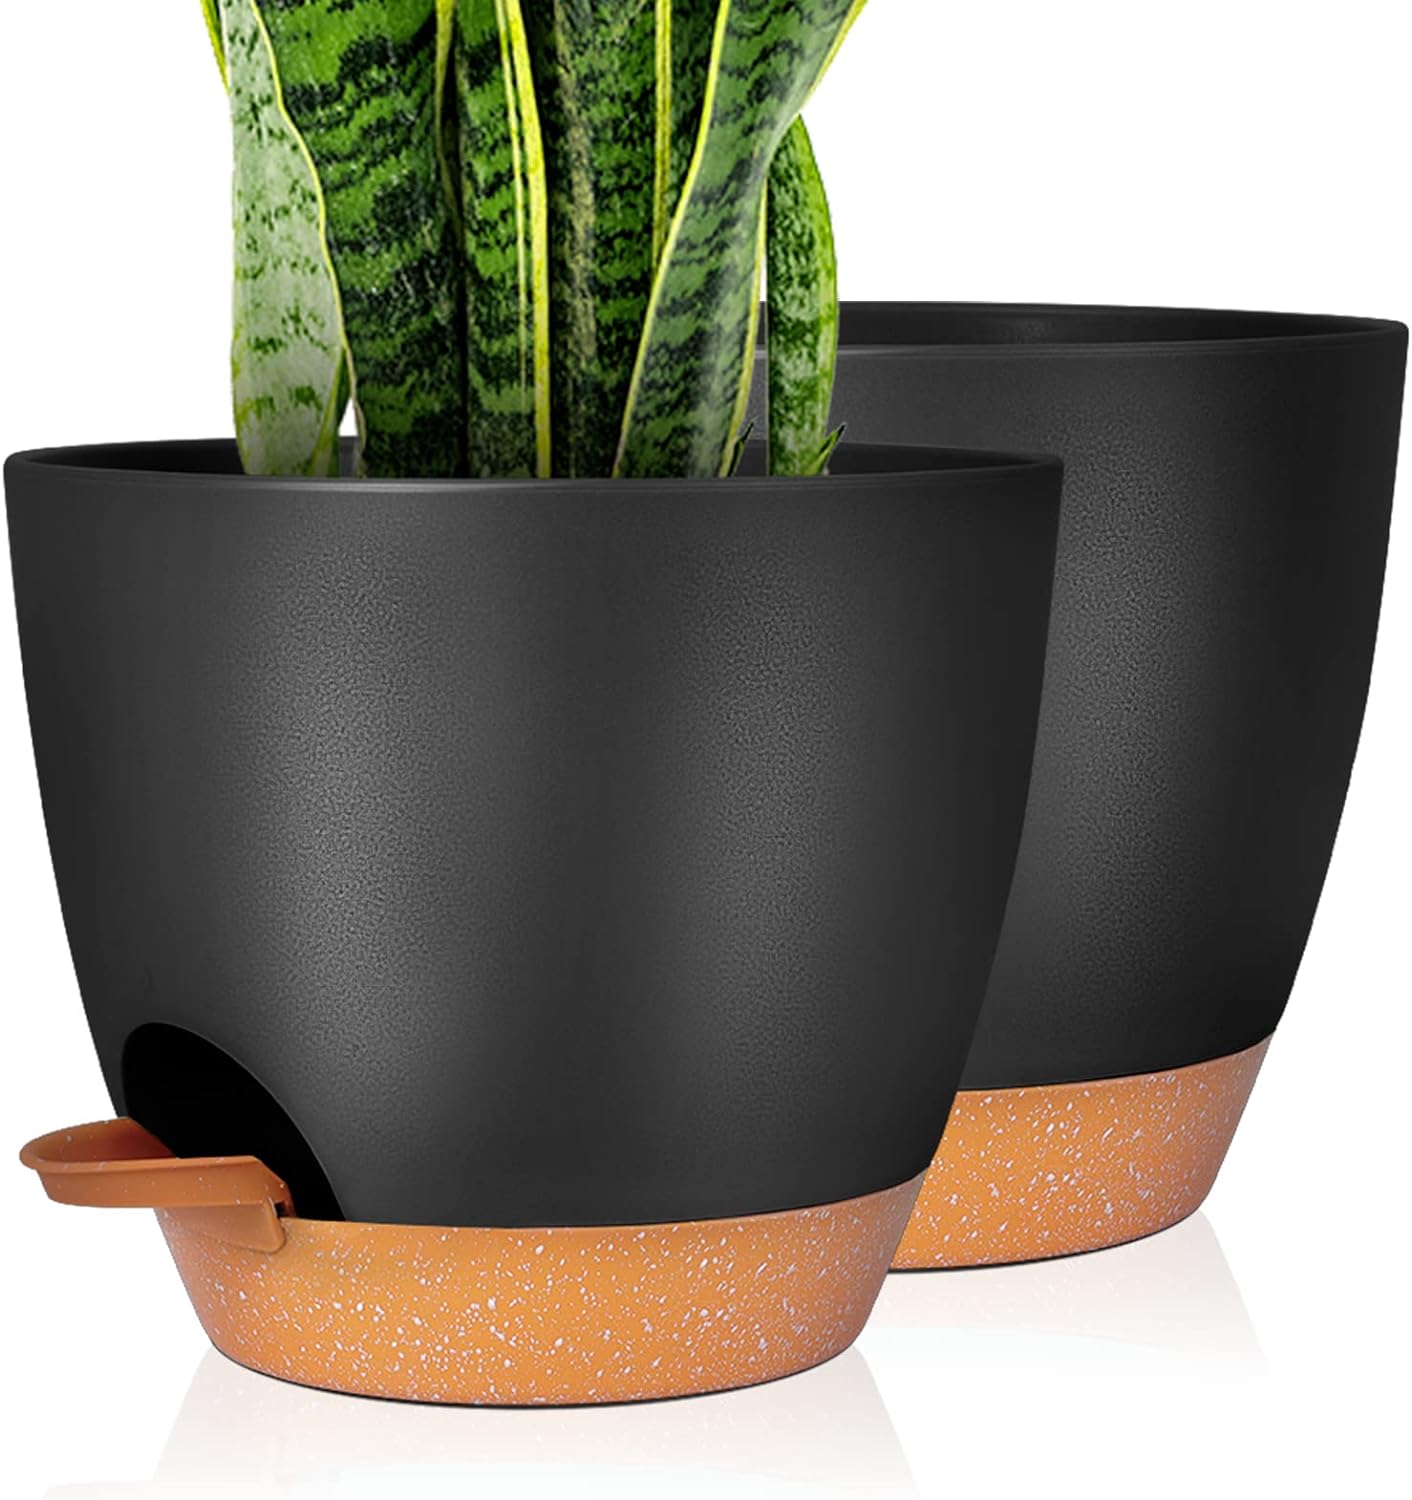 GARDIFE Plant Pots Set of 2 Pack 8 inch,Planters for Indoor Plants with Drainage Holes, Modern Decorative Flower Pots for All House Plants, Flowers, Black&Brown